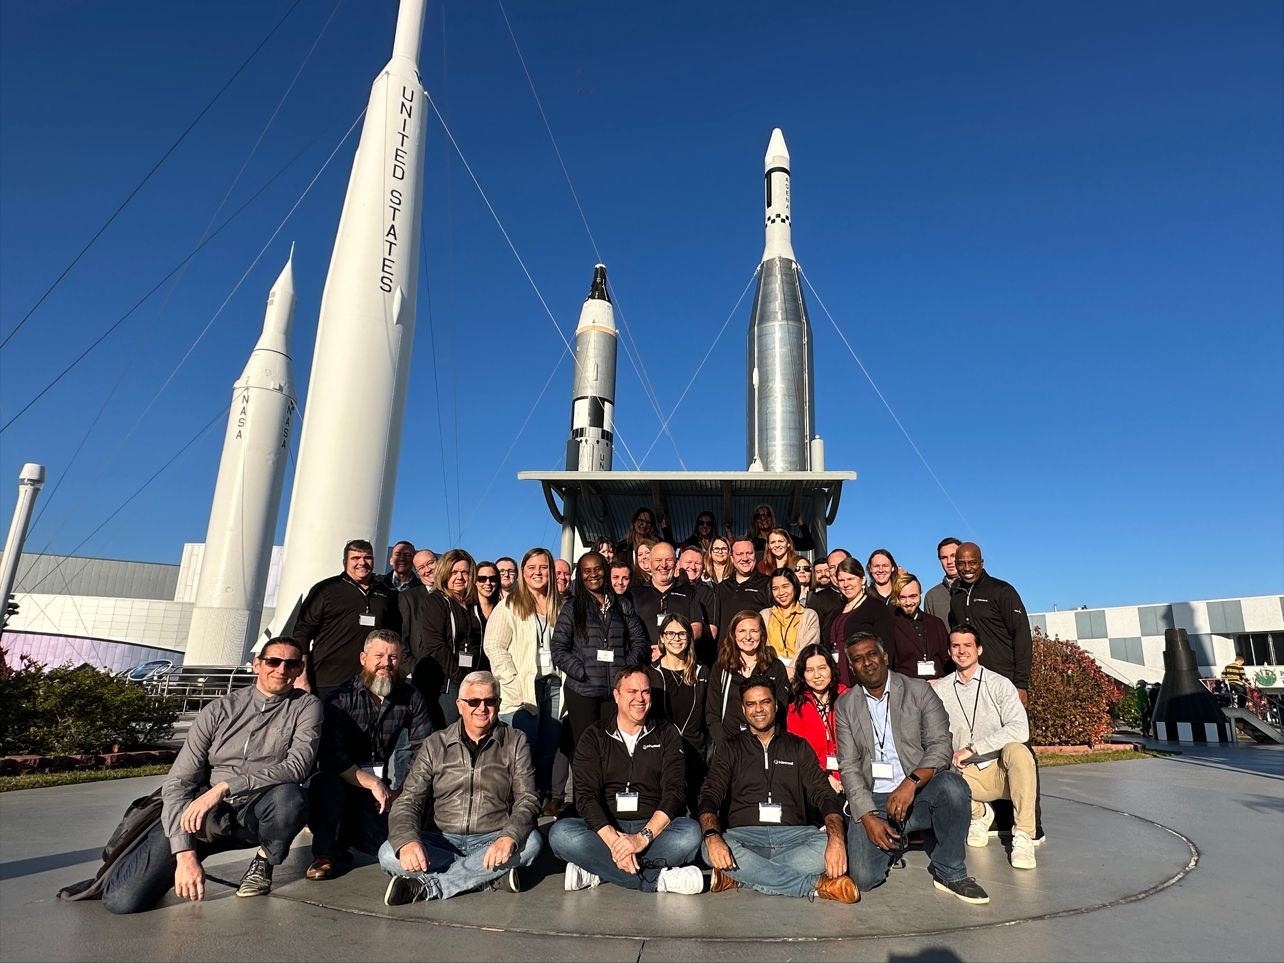 Investing in our people - 40 people attended our Leaders Course at Kennedy Space Center in Florida